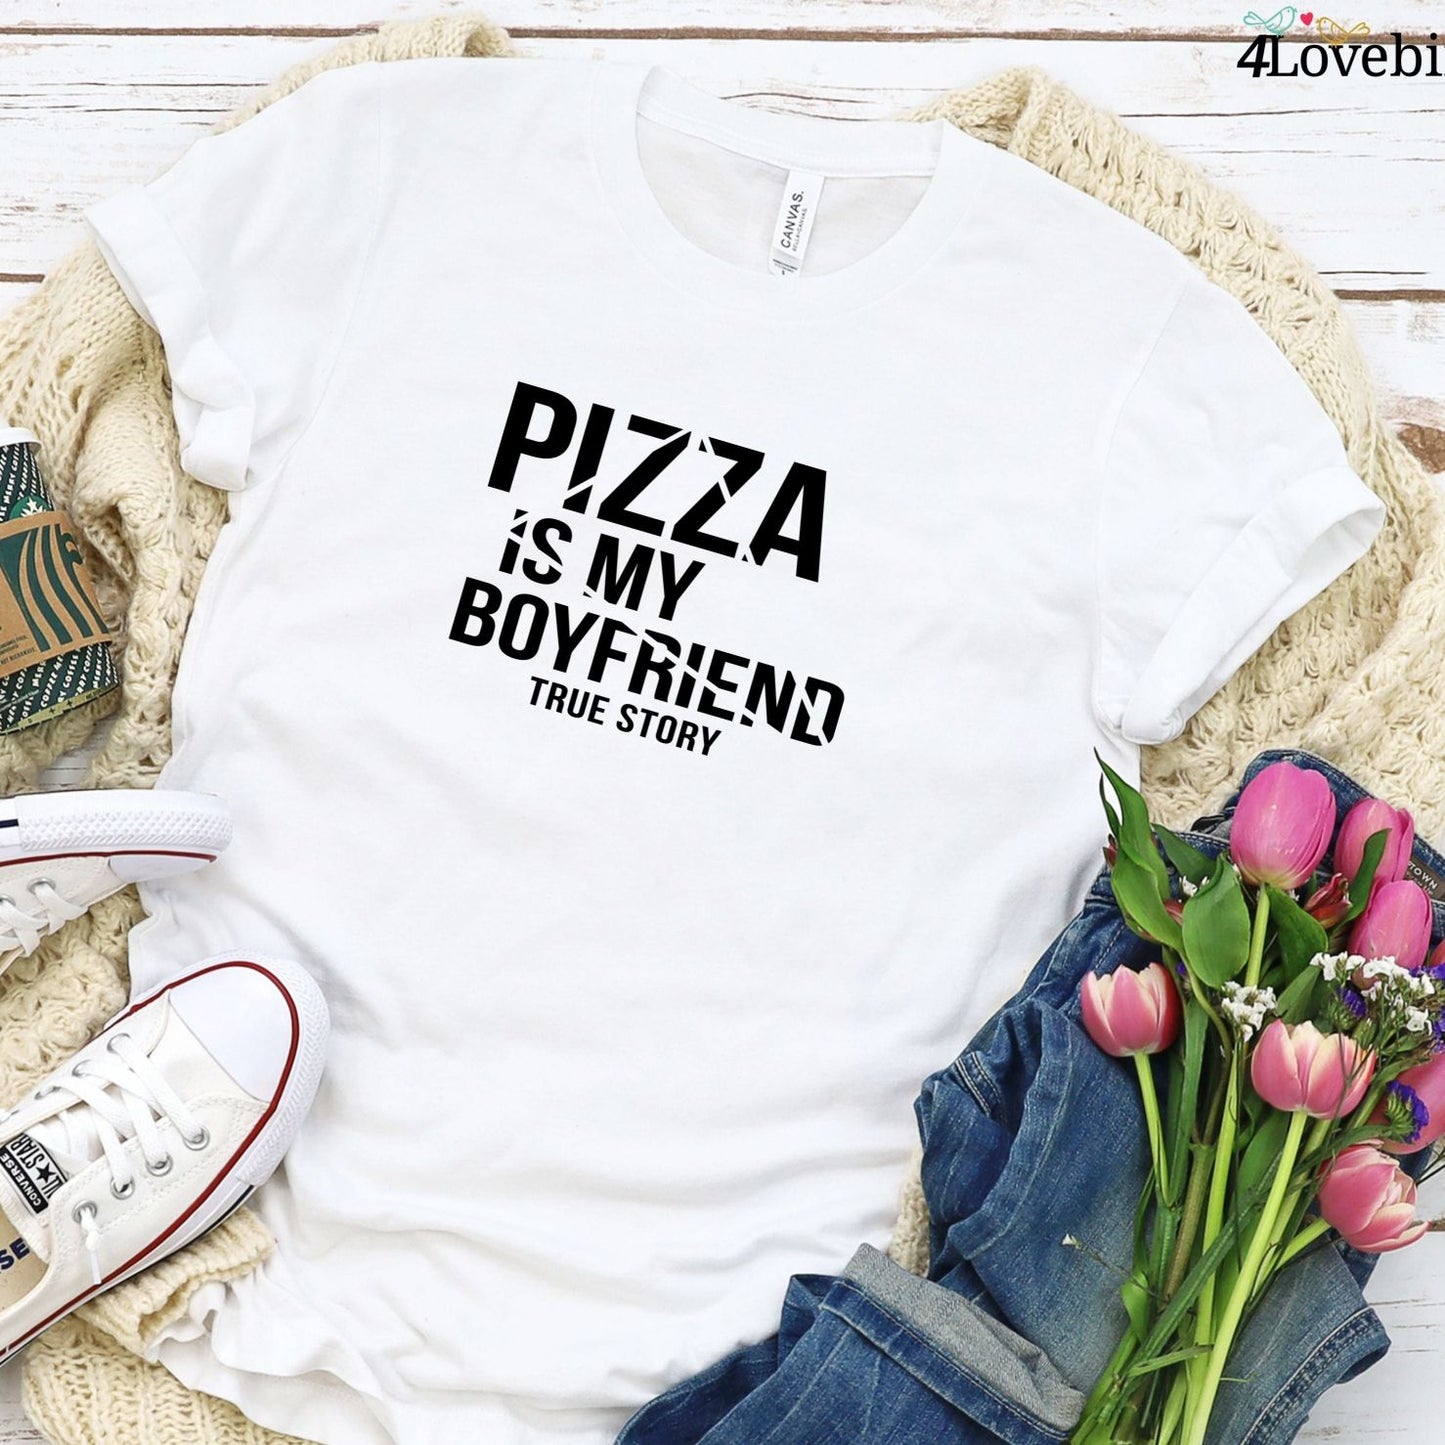 Pizza Lover Boyfriend & Girlfriend Matching Outfits Set - Valentine's Day Gift for Foodie Couples